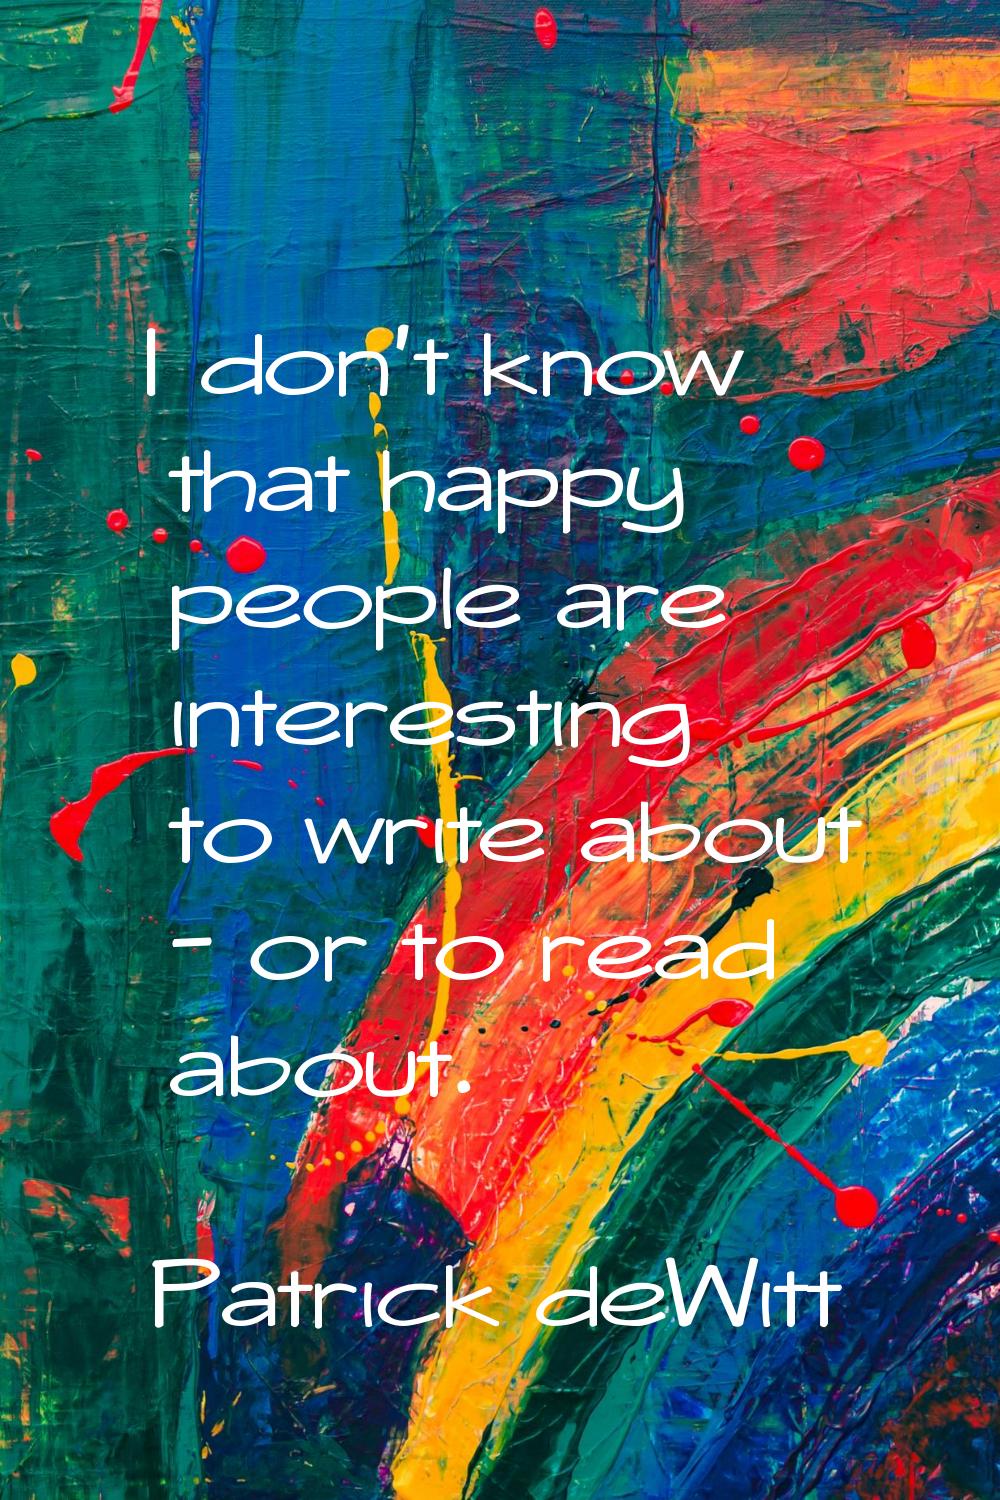 I don't know that happy people are interesting to write about - or to read about.